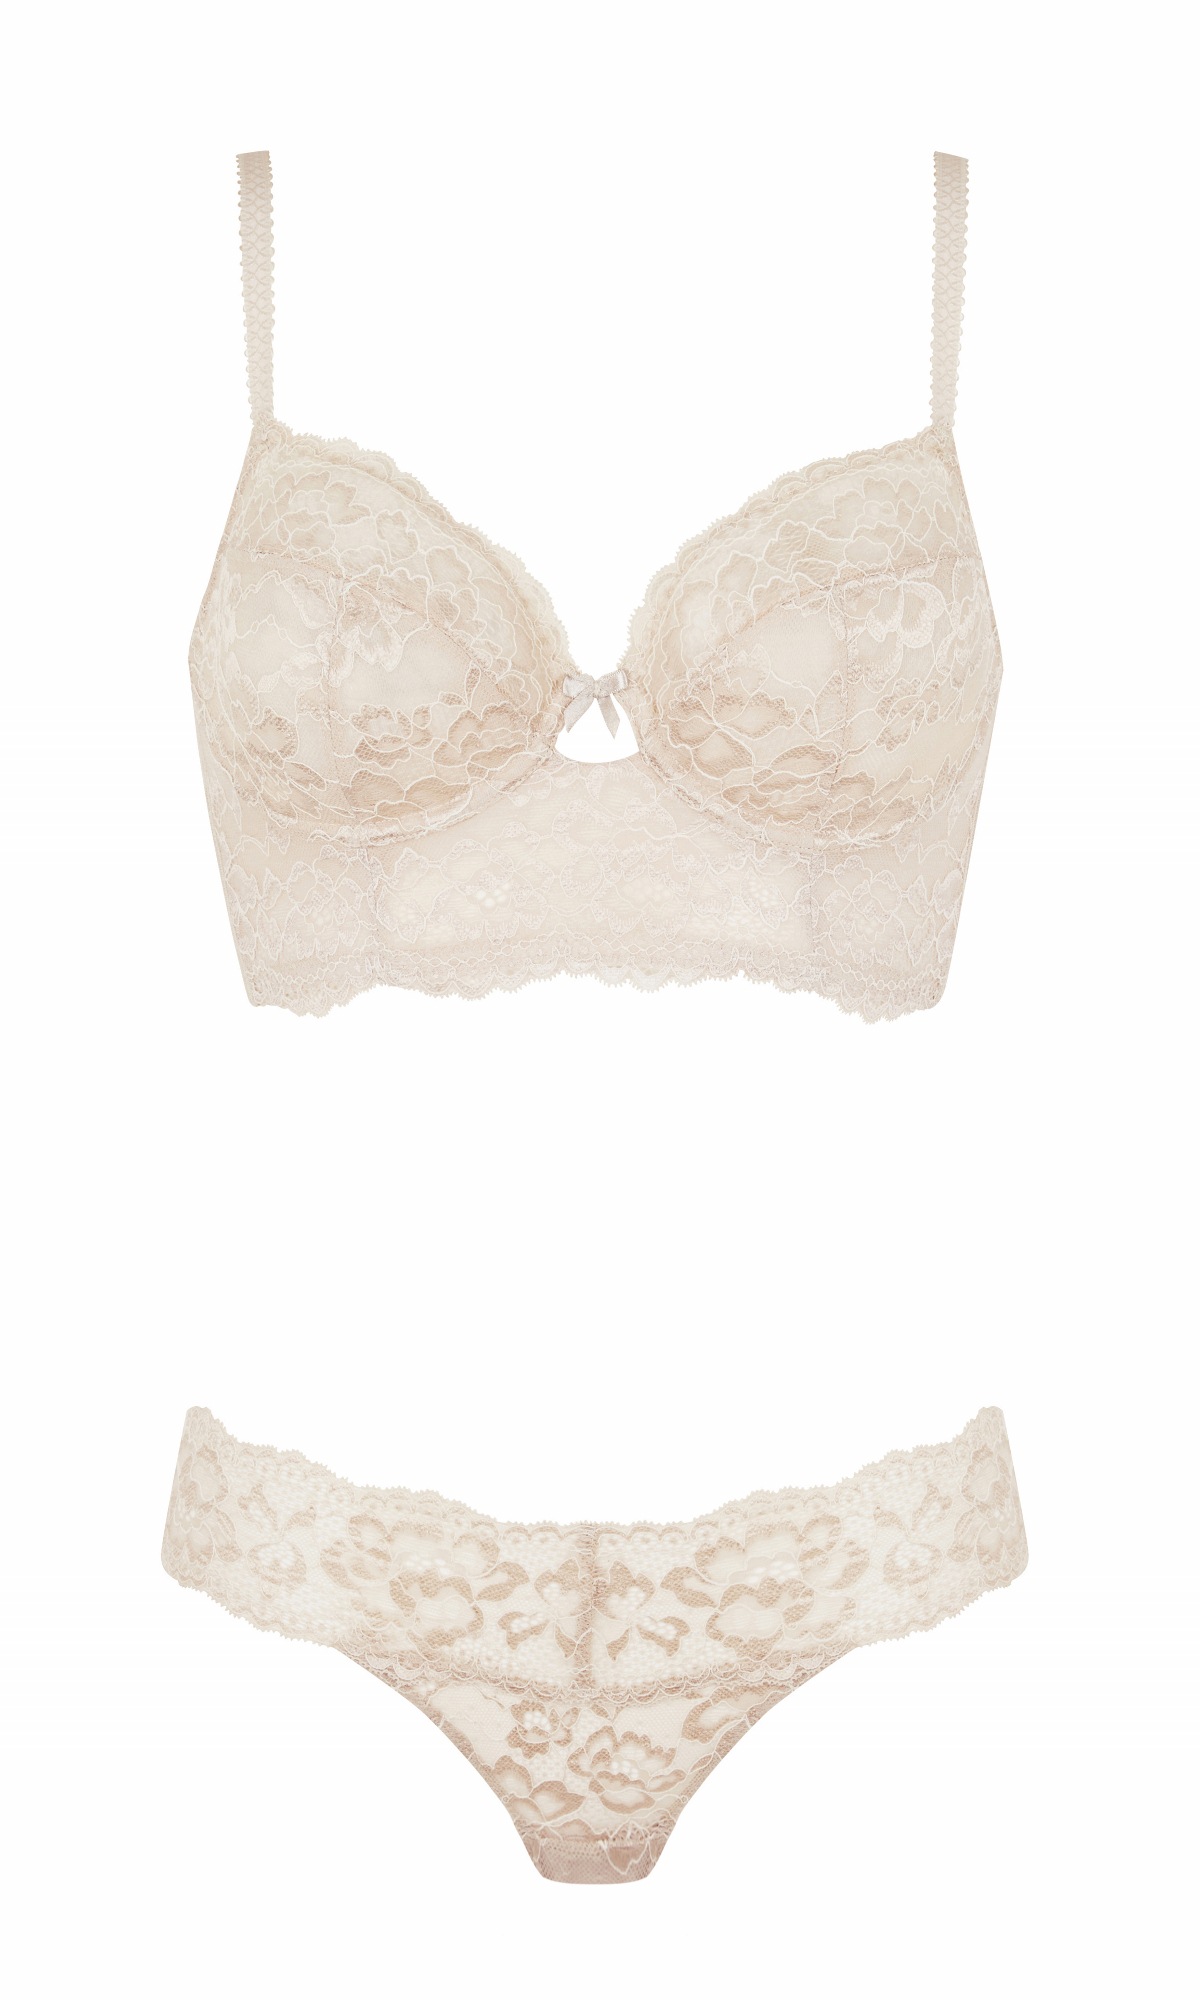 M&S Made to Fit Lingerie Event (15) (1200x2000).jpg